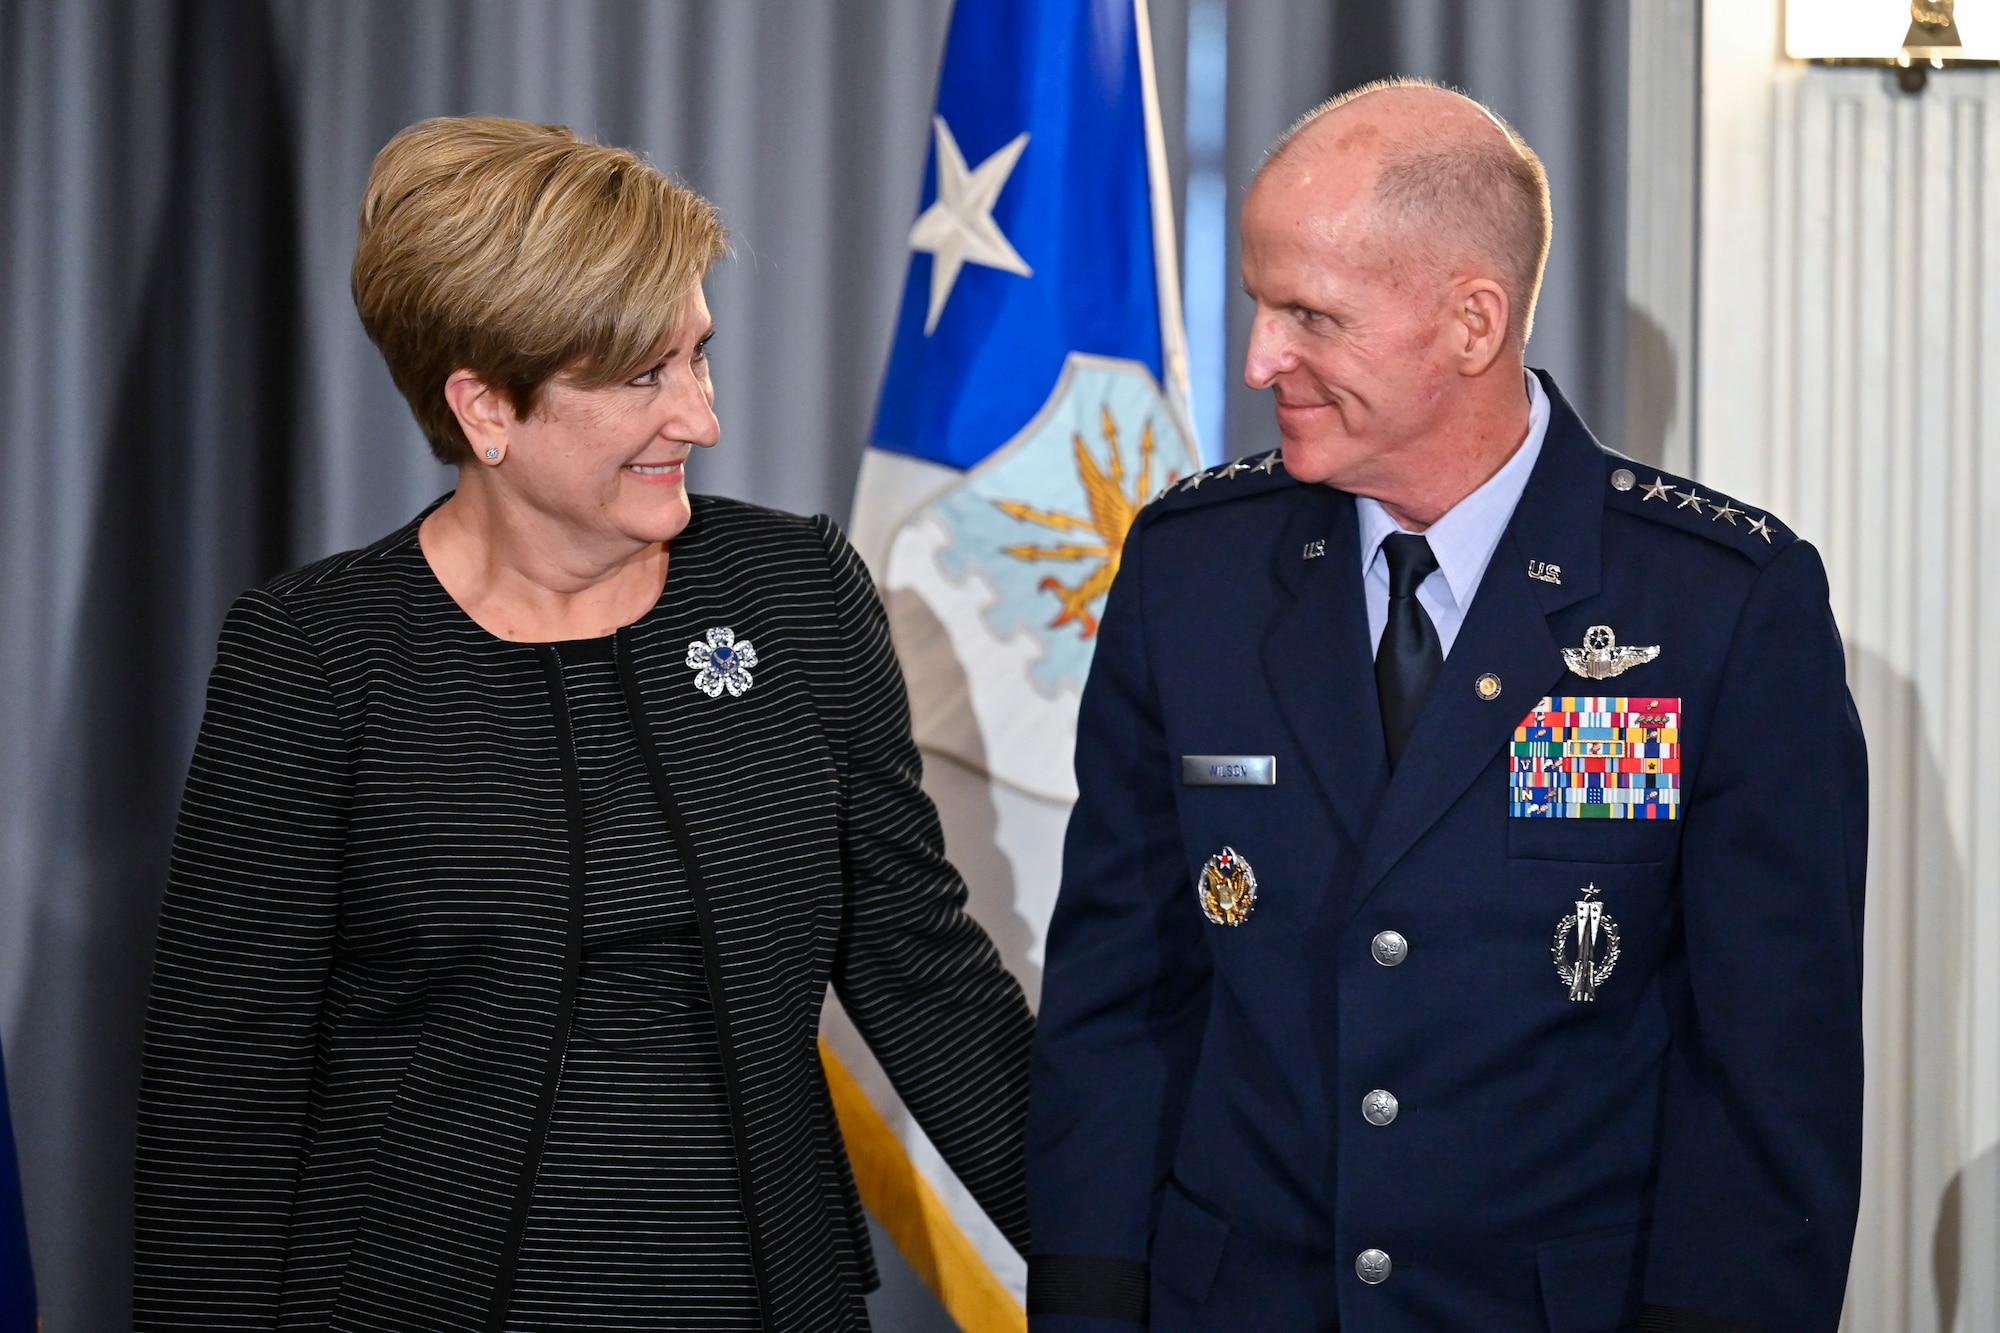 Air Force Vice Chief of Staff Gen. Stephen W. Wilson stands with his wife Nancy during his retirement ceremony at Joint Base Anacostia-Bolling, Washington, D.C., Nov. 13, 2020. Gen. David W. Allvin will succeed Wilson as the 40th Air Force vice chief of staff. (U.S. Air Force photo by Eric Dietrich)